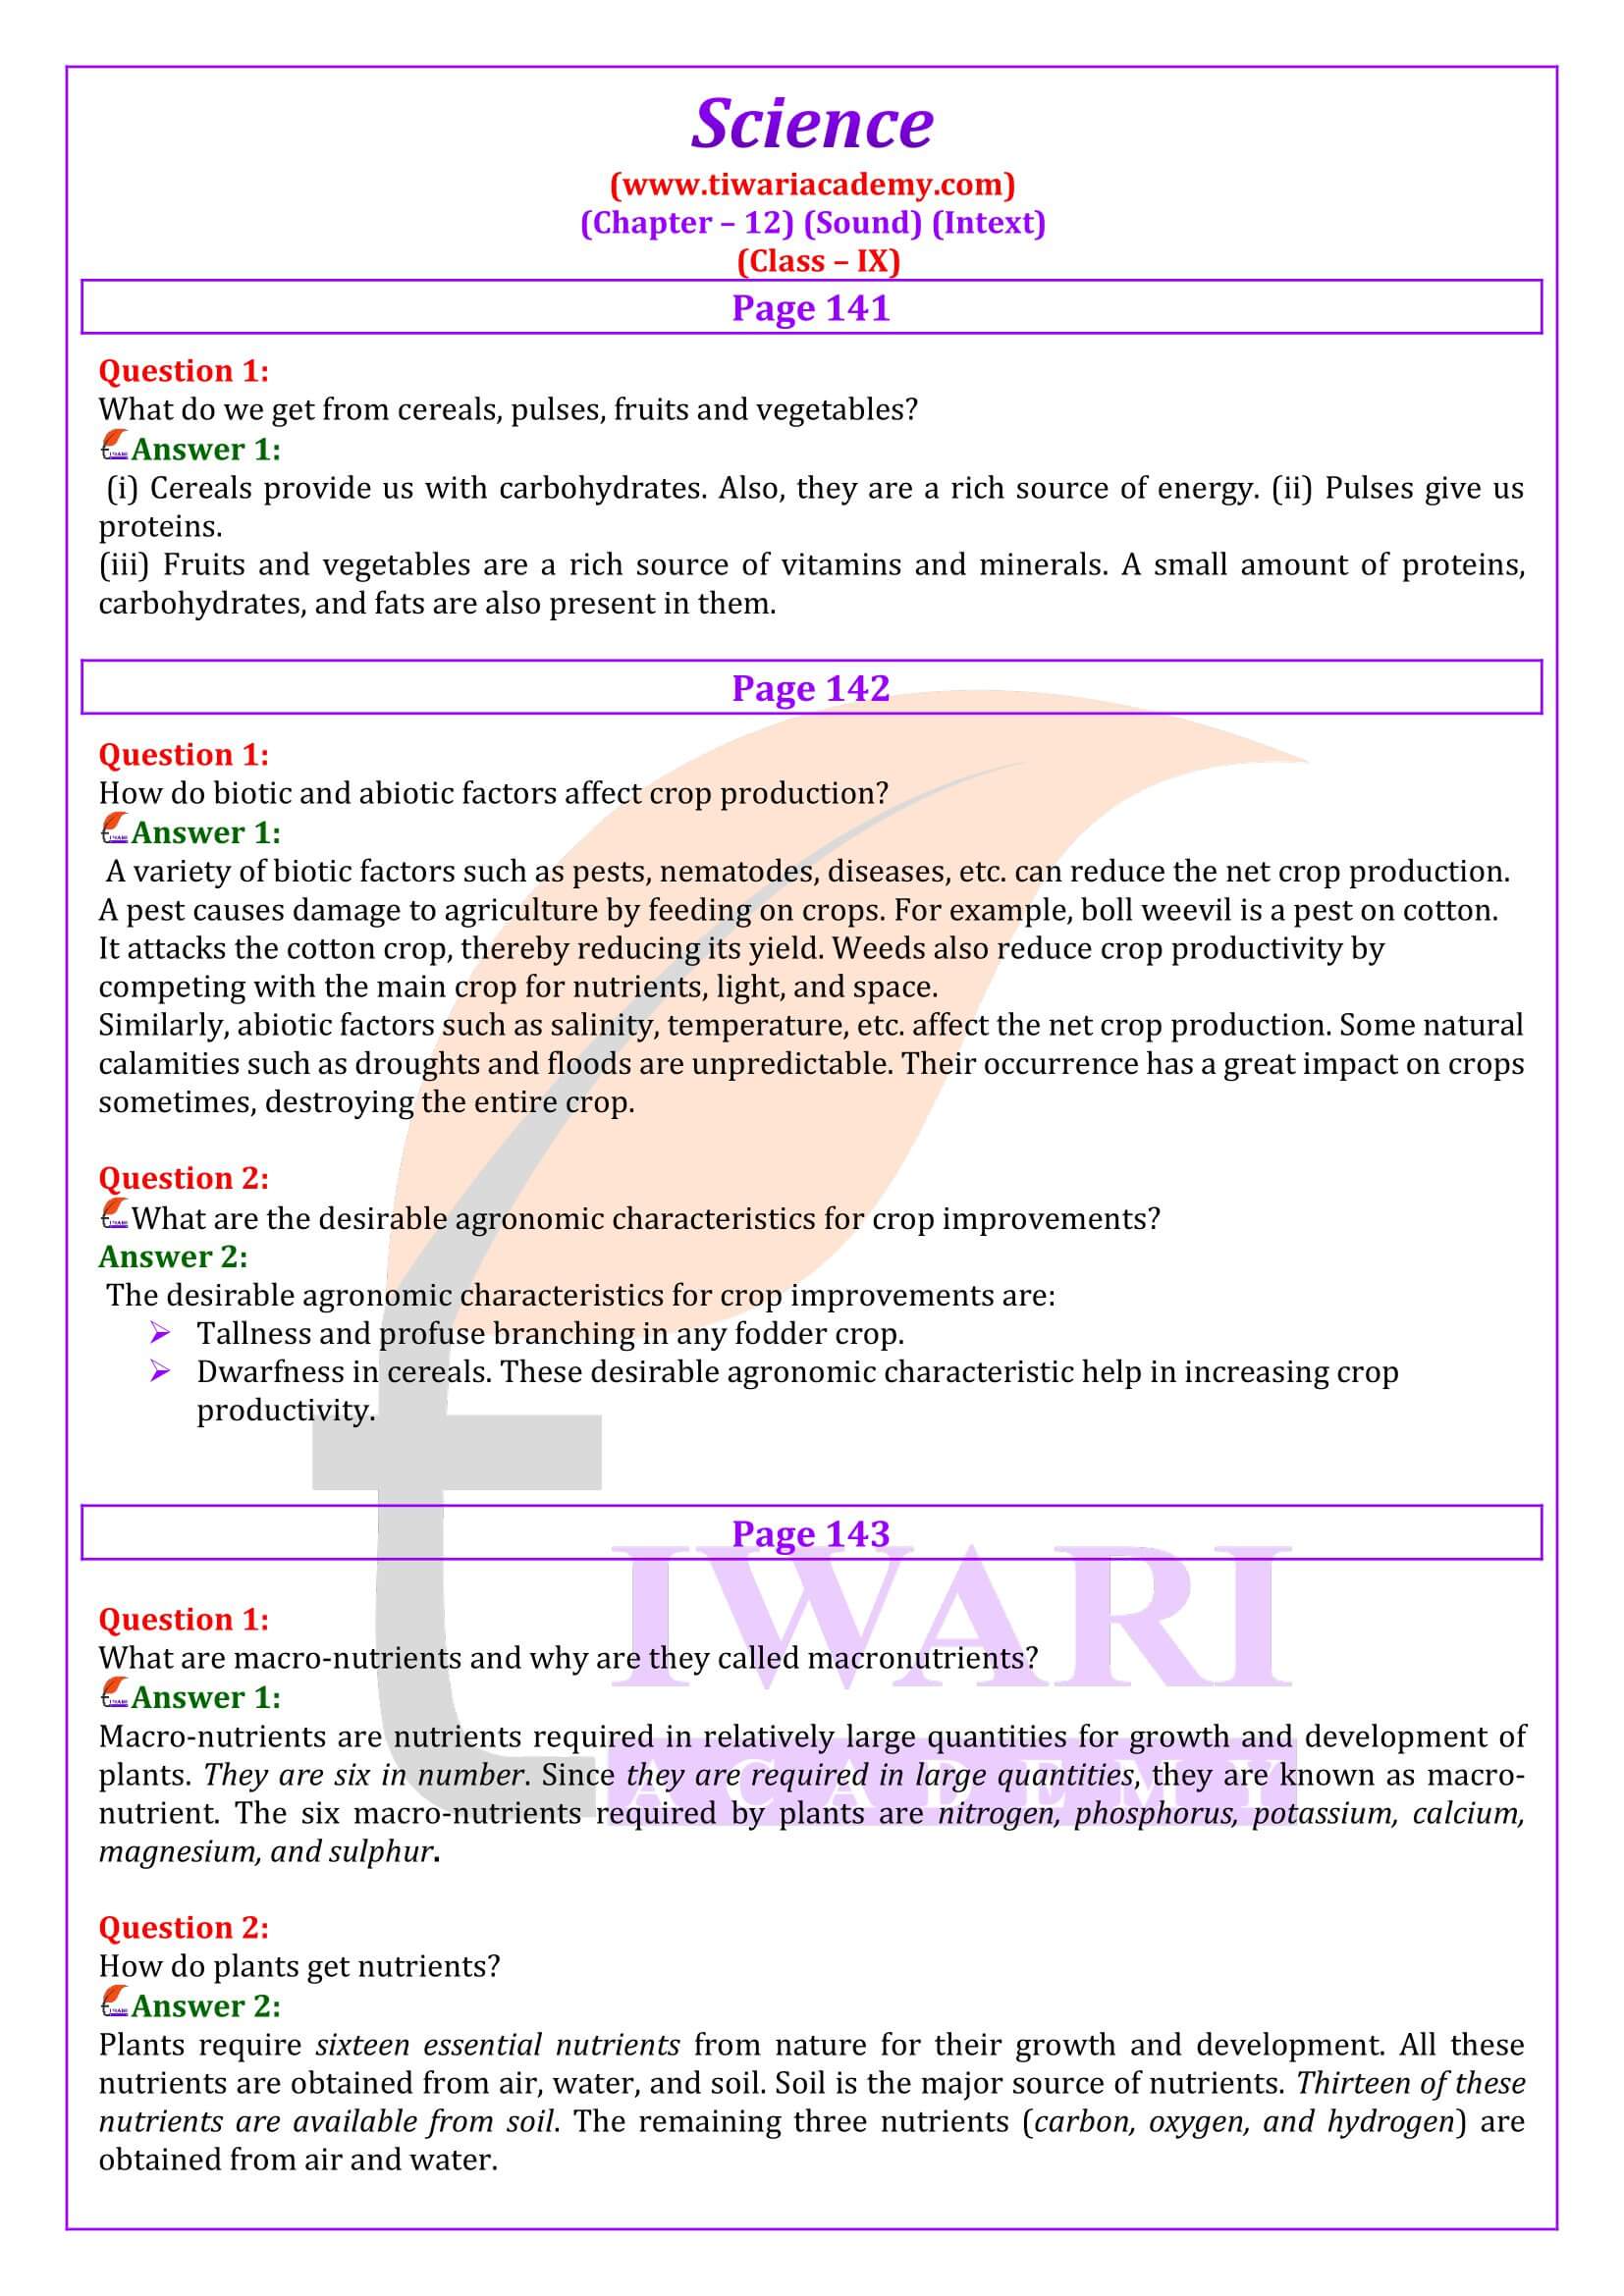 NCERT Solutions for Class 9 Science Chapter 12 Intext Questions